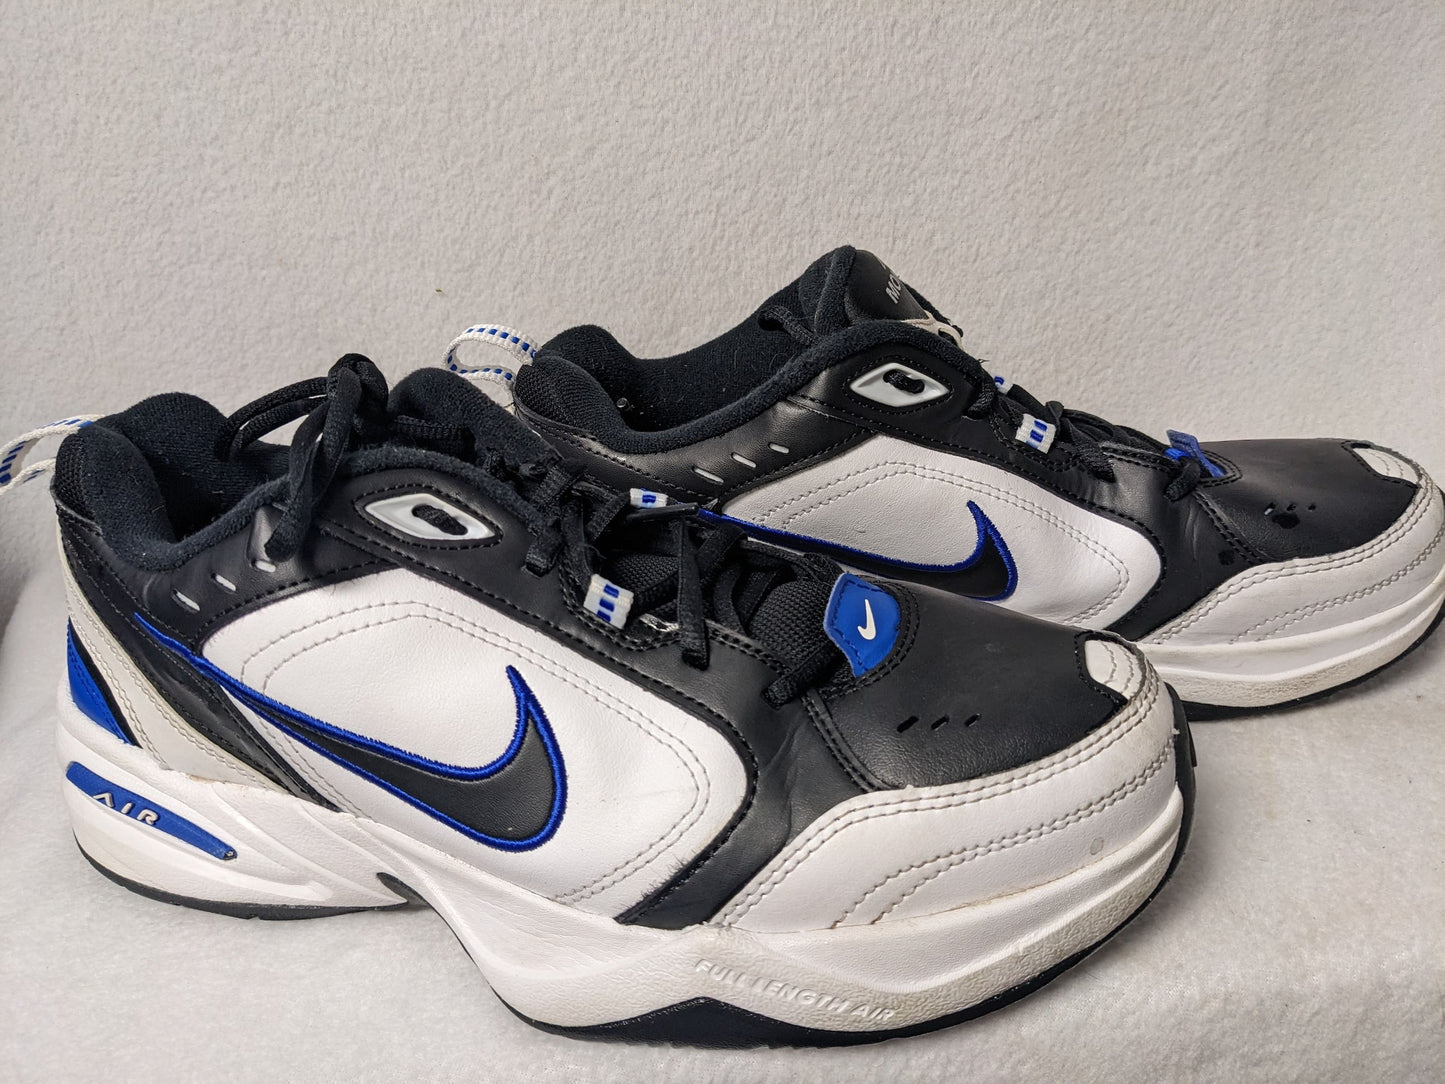 Nike Air Monarch Athletic Shoes Size 10.5 Color White Condition Used